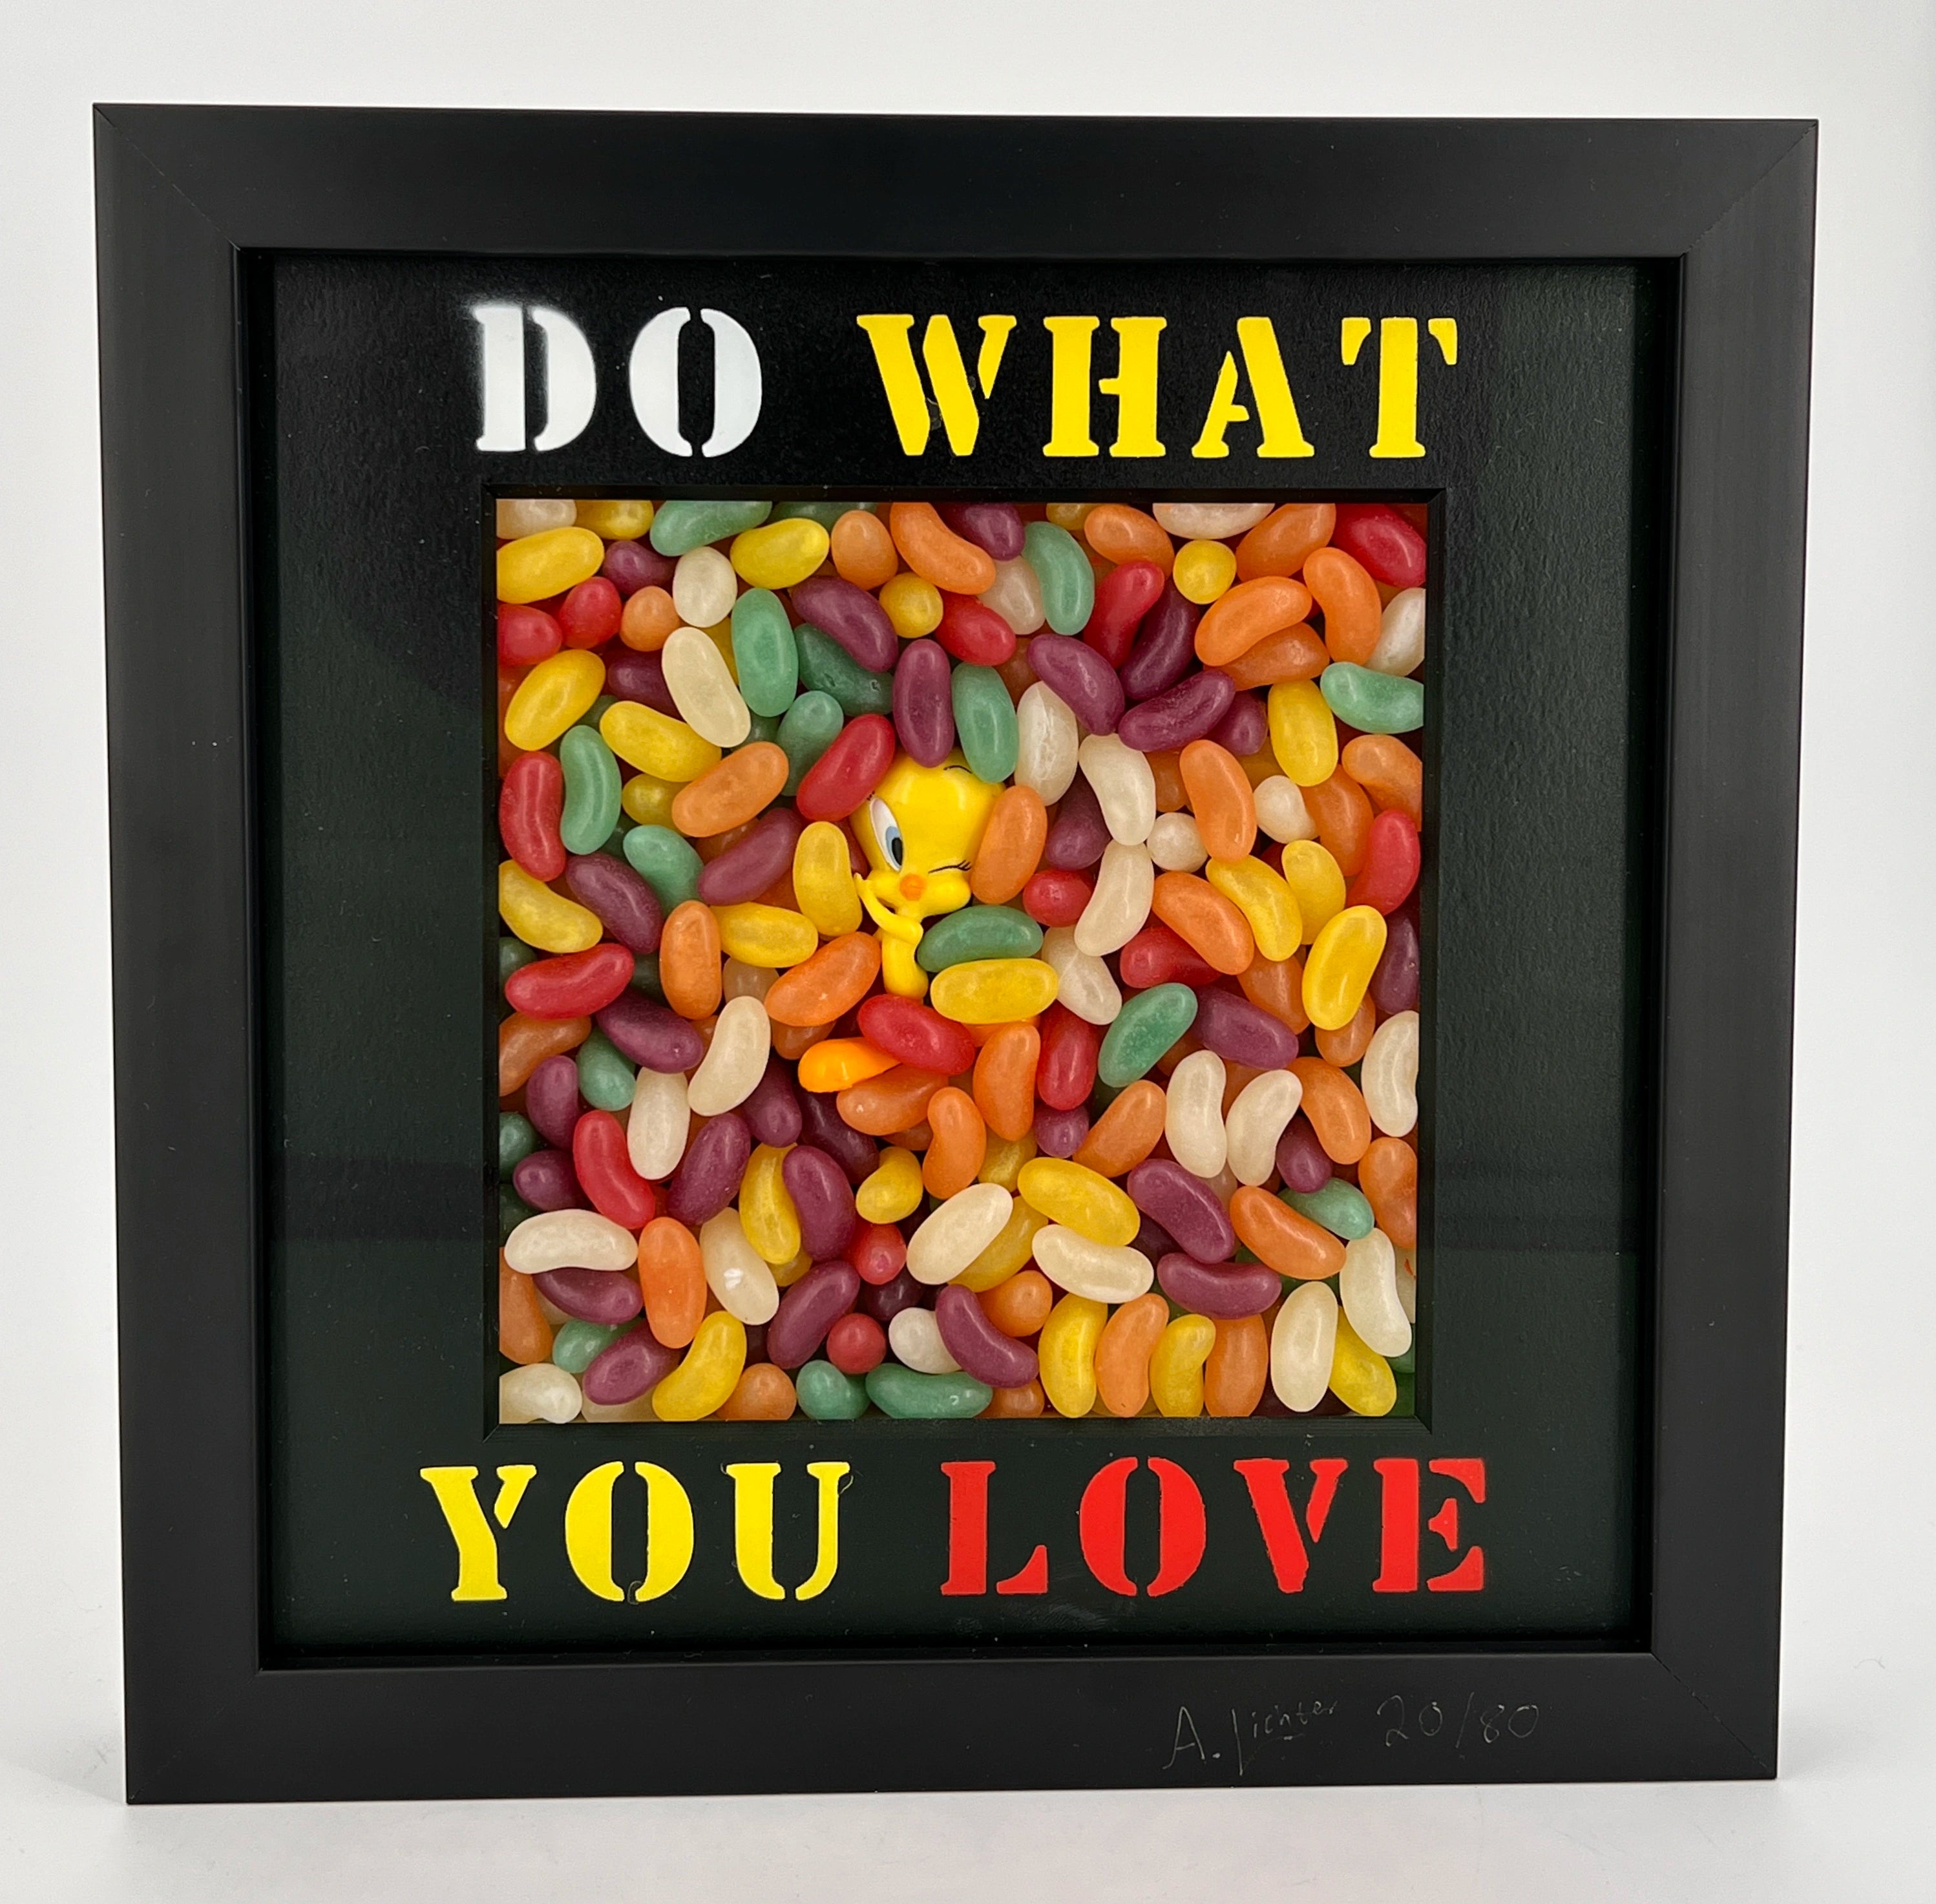 Andreas Lichter - Do what you LOVE - Tweety - Galerie Vogel